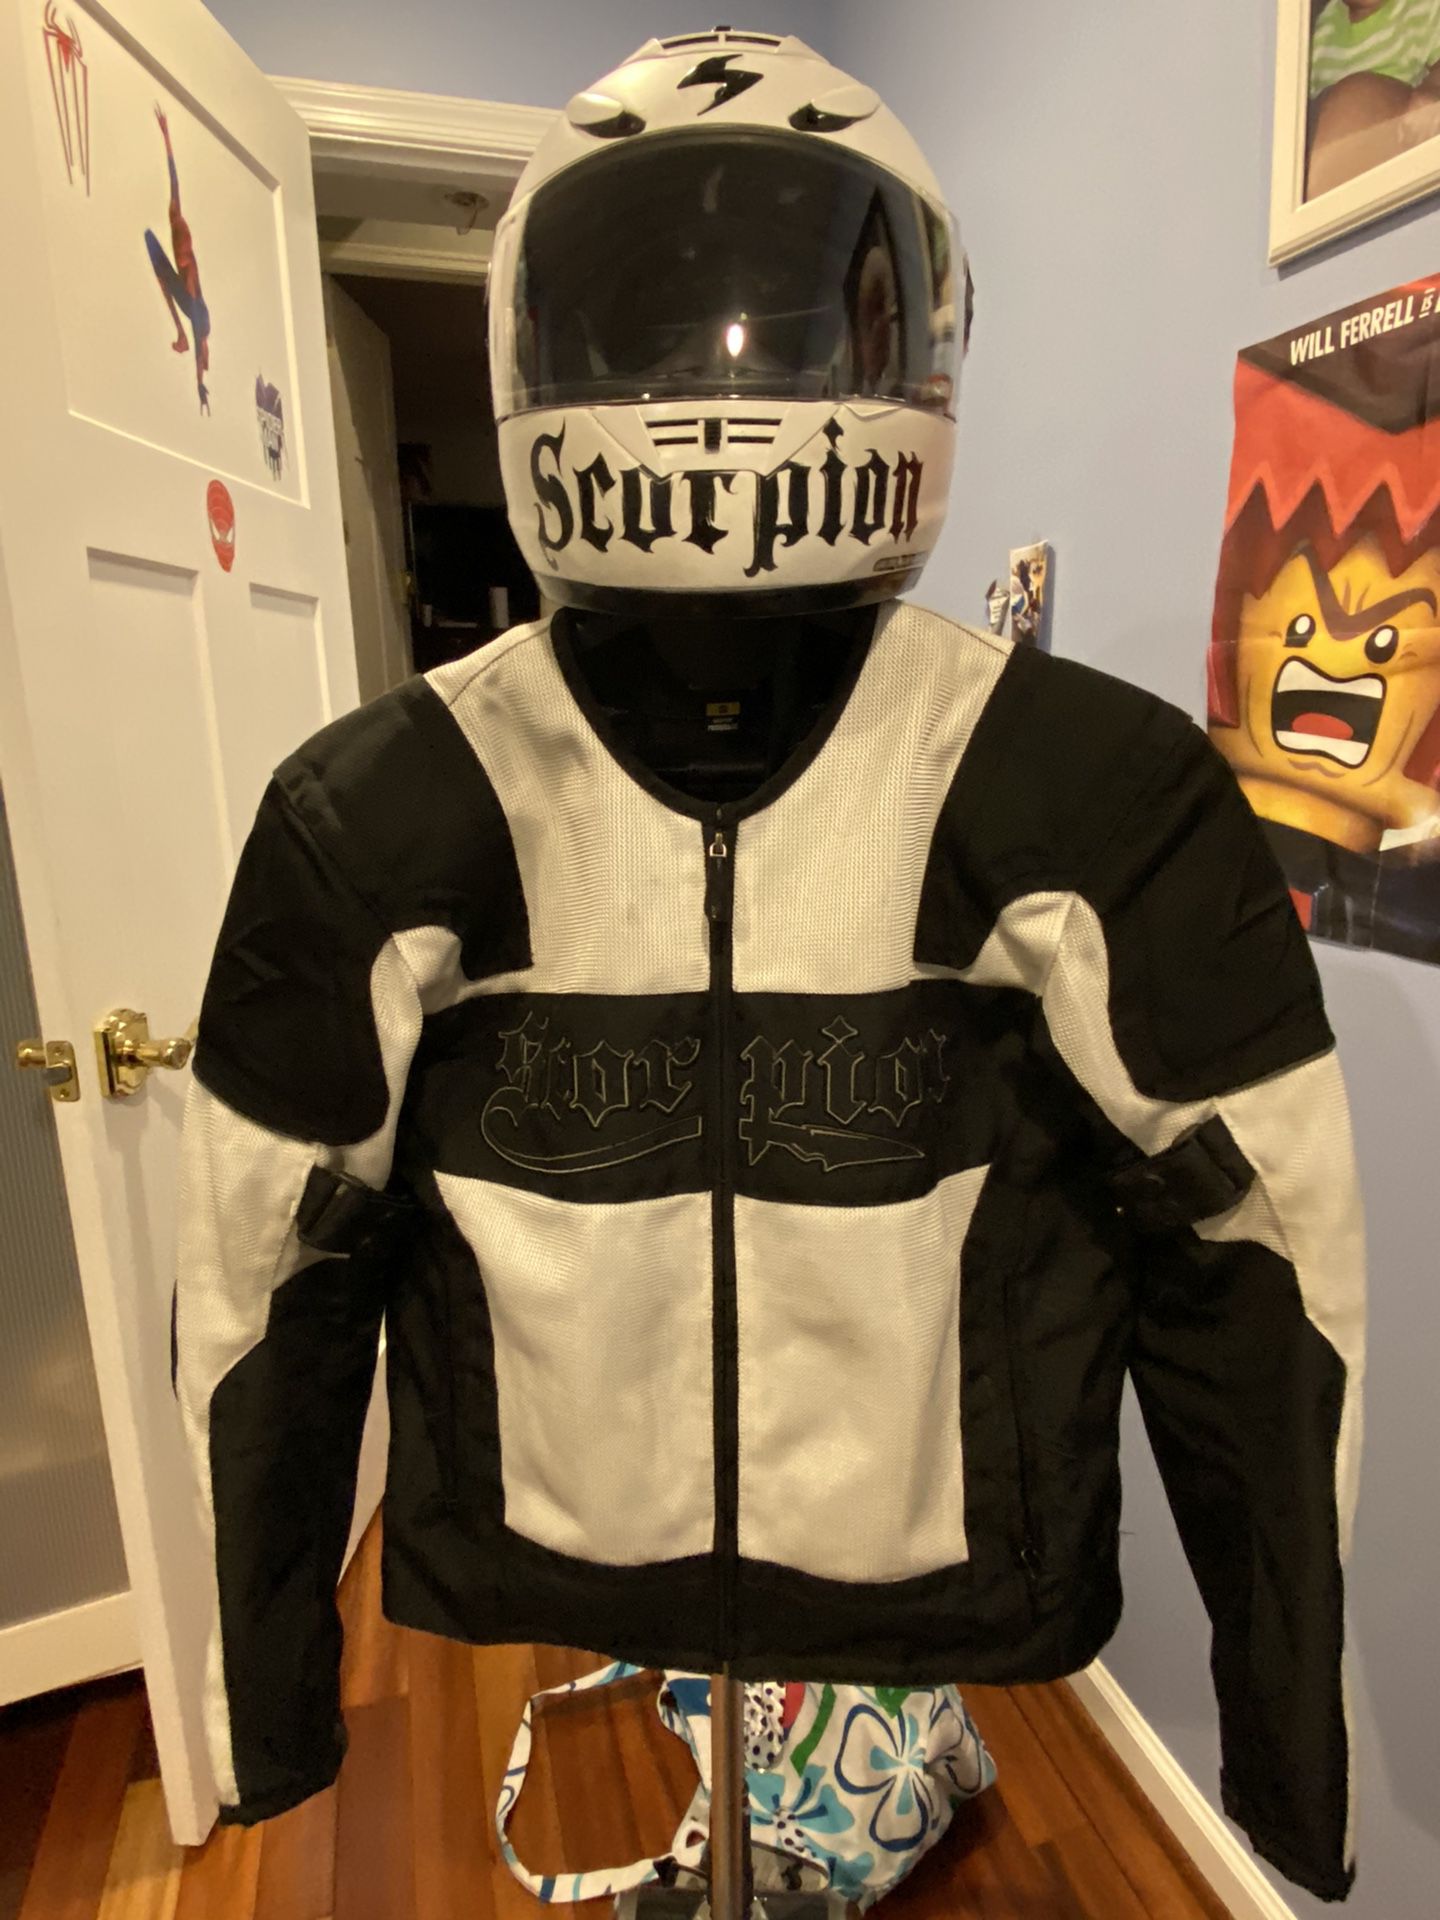 Motorcycle riding jacket, helmet and glove